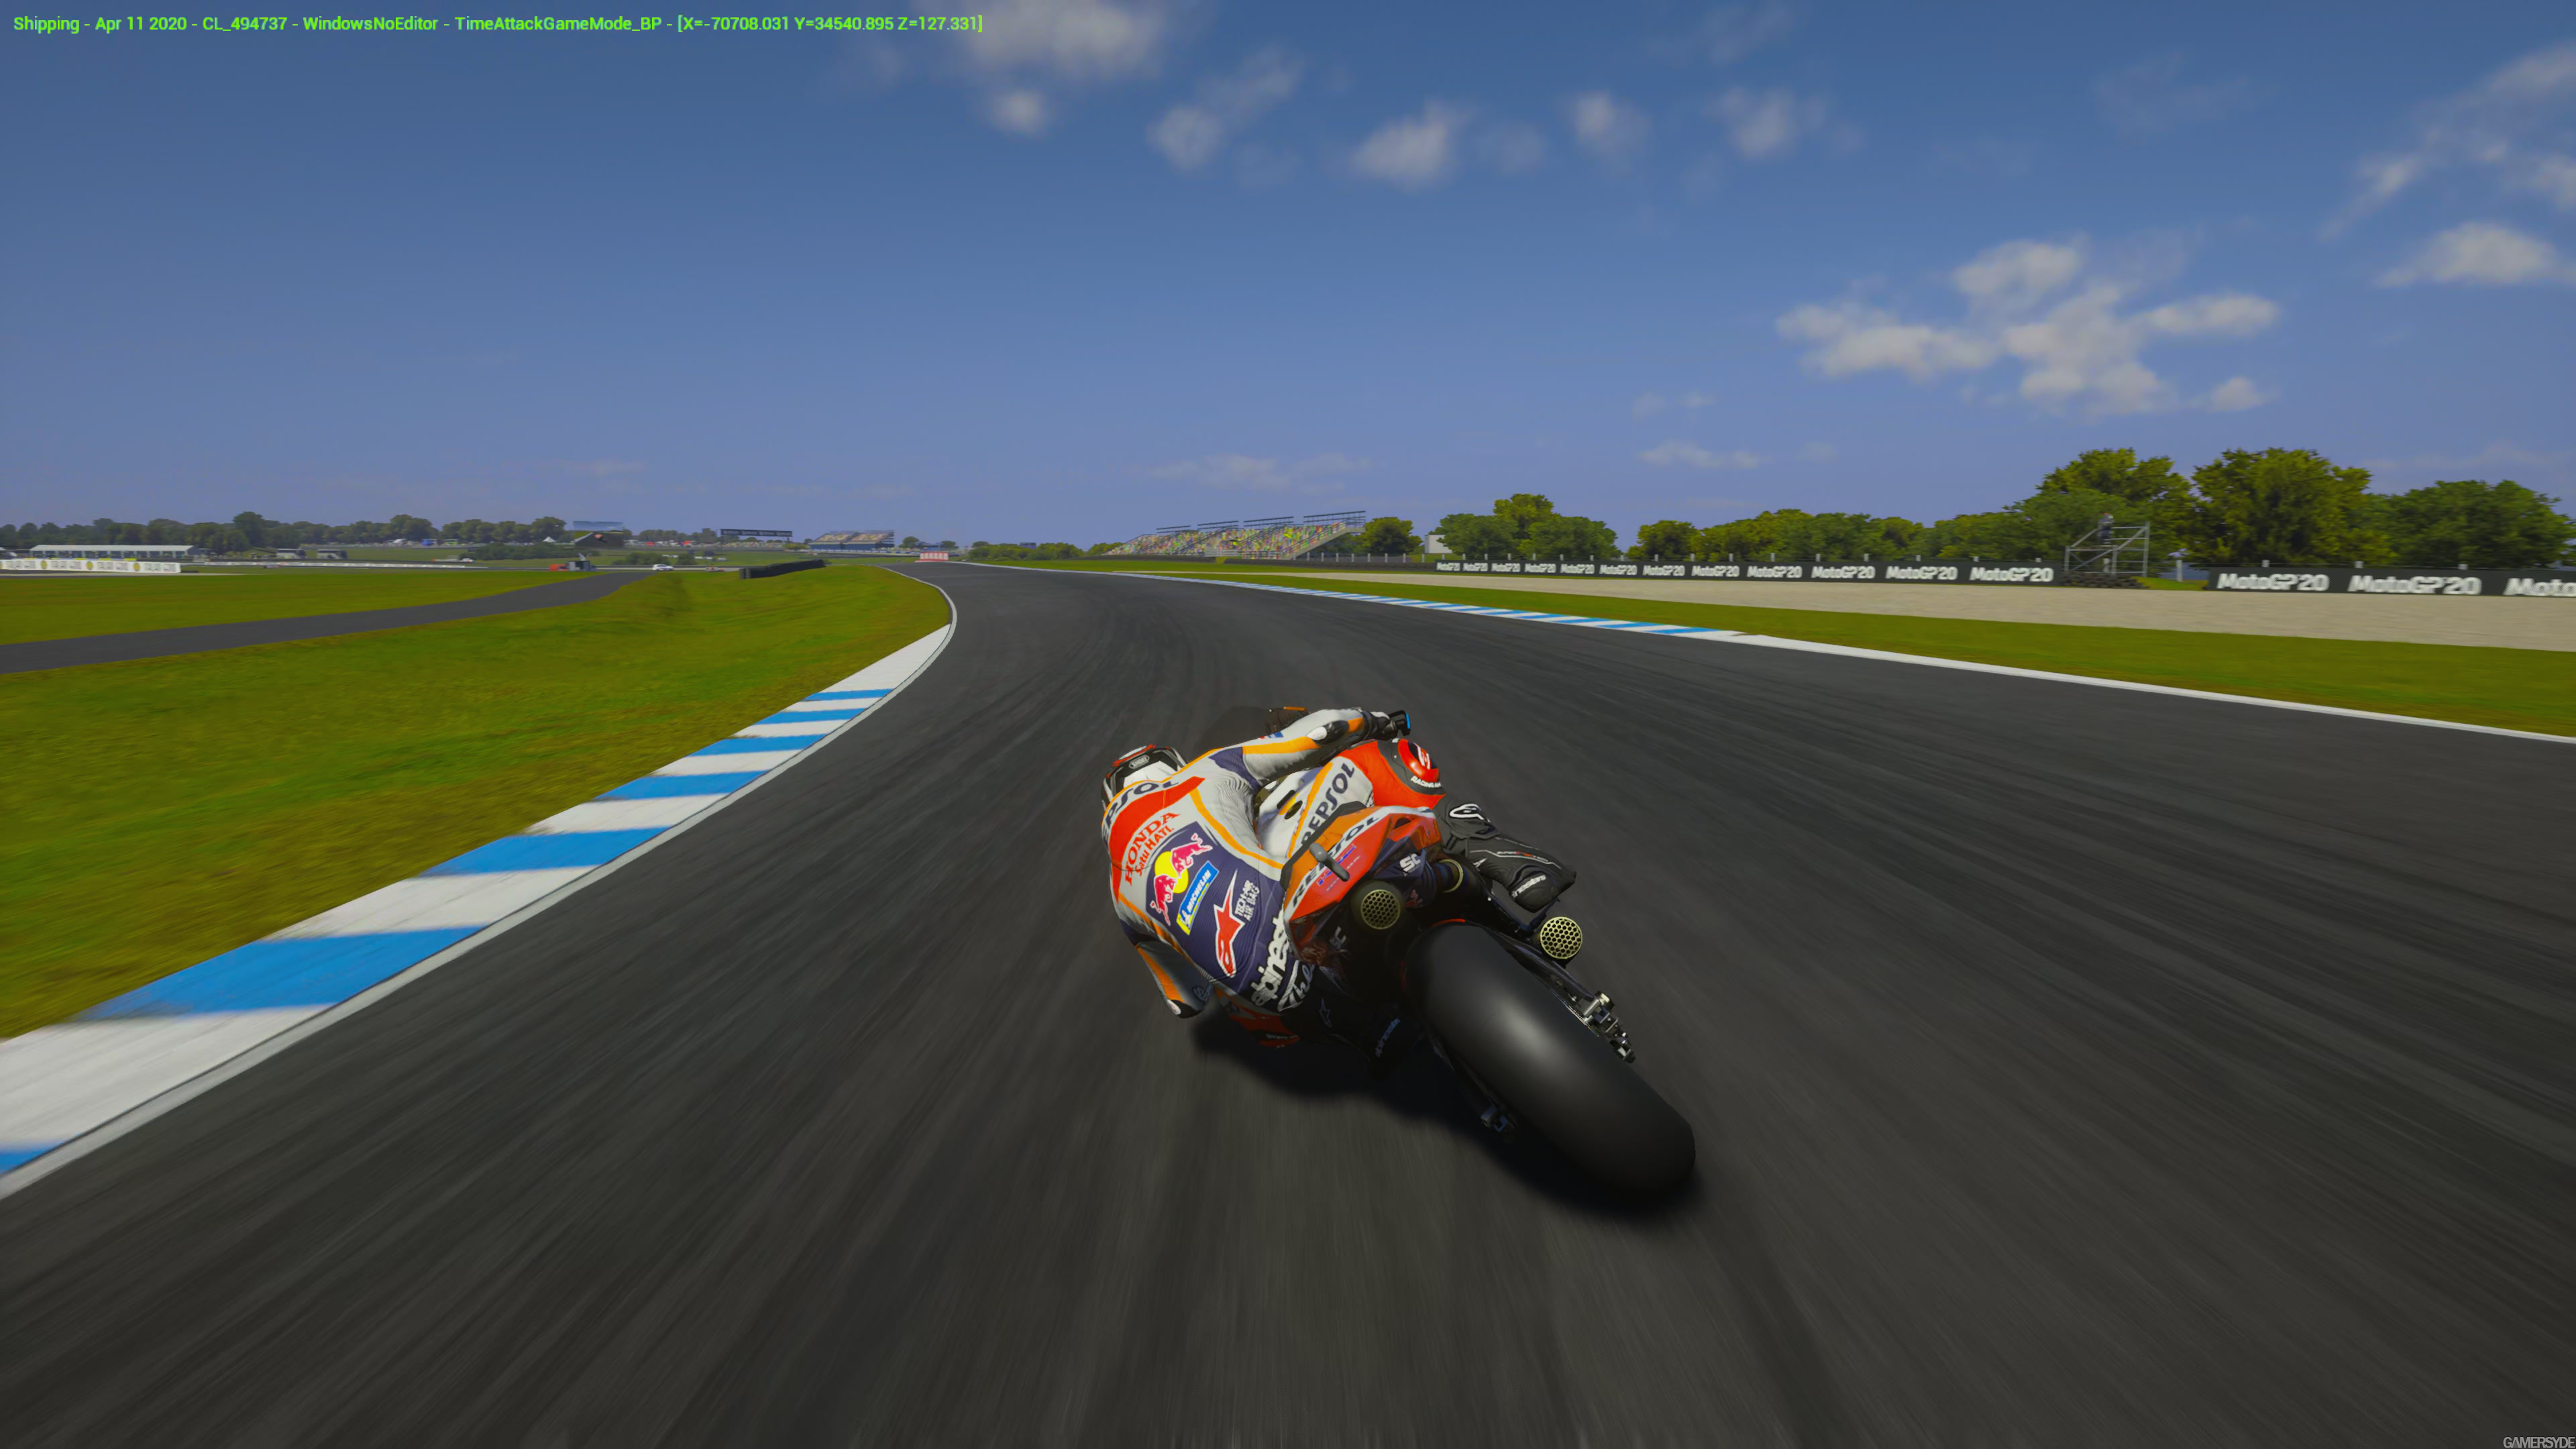 MotoGP 20 - Phillip Island - HDR (PC/4K) - High quality stream and download  - Gamersyde